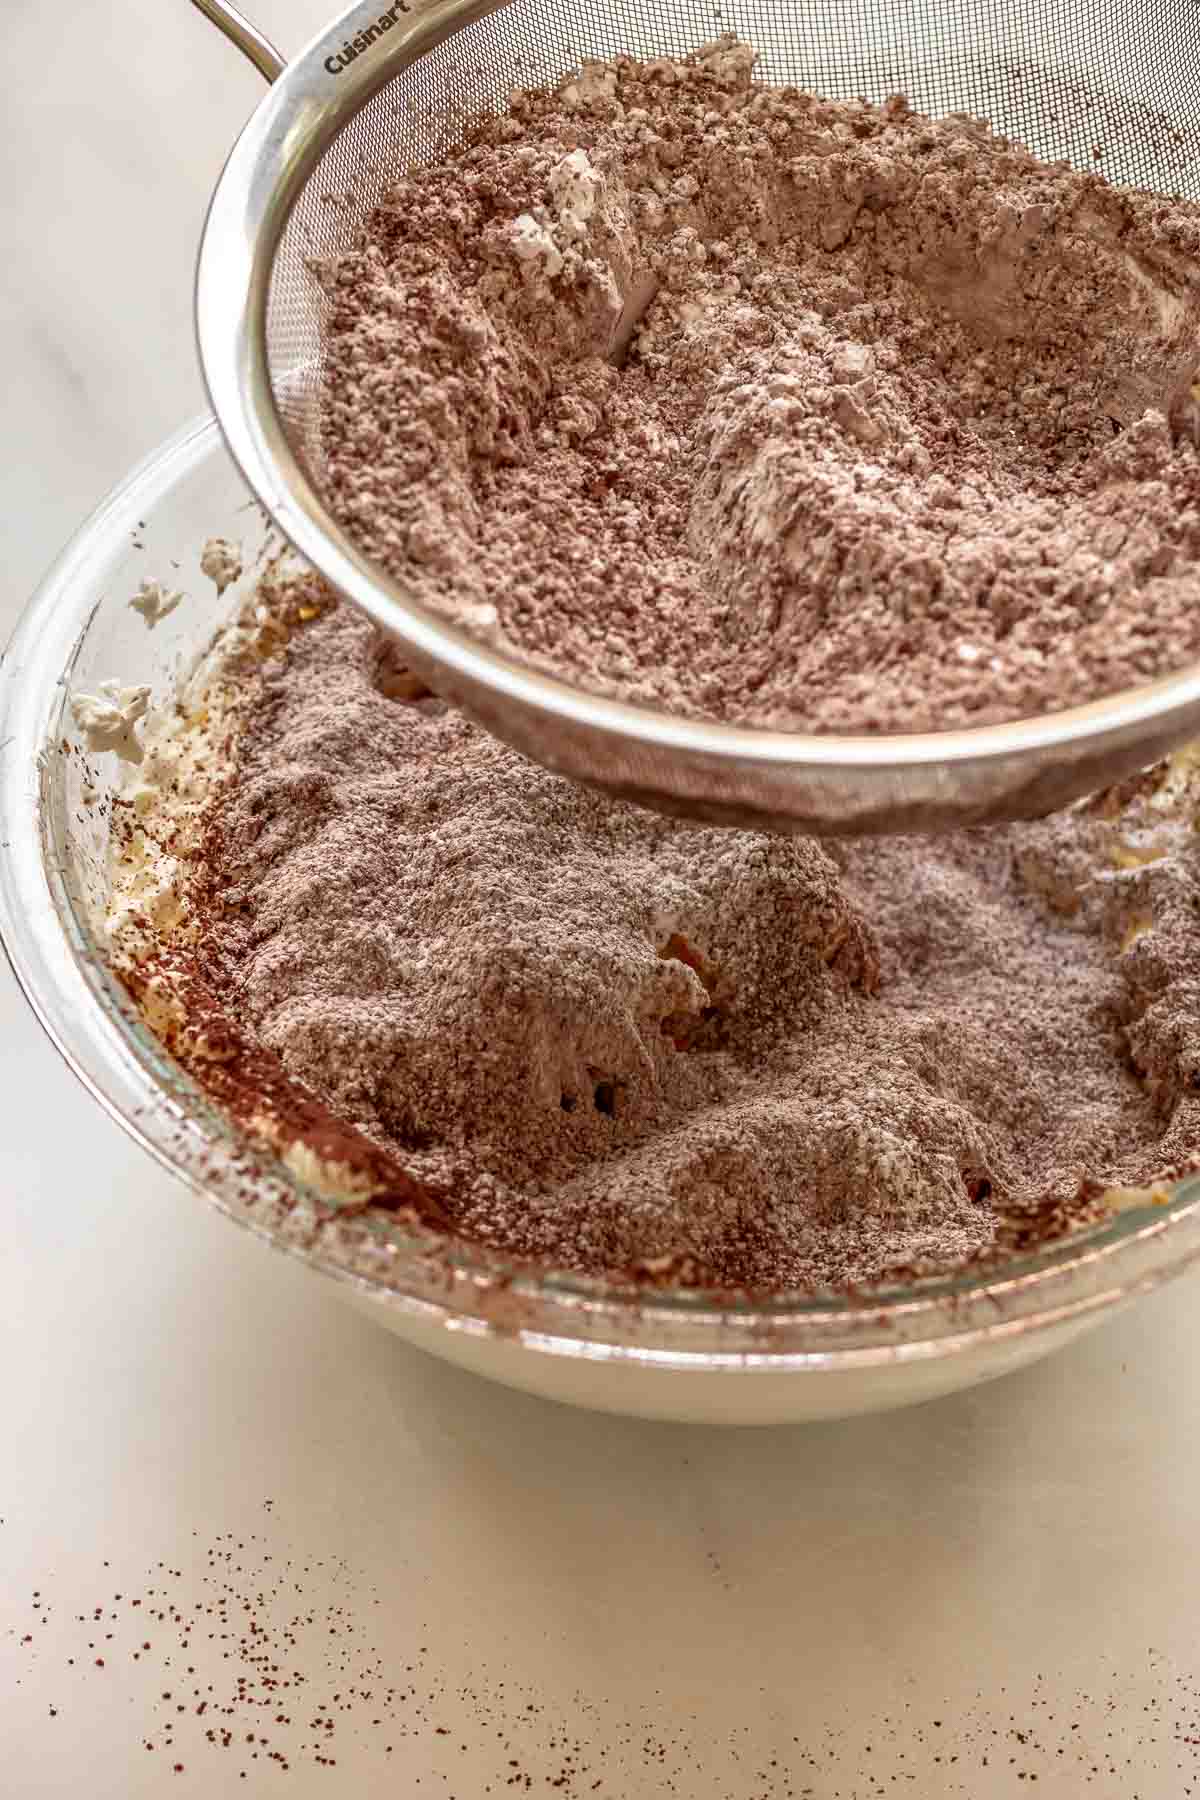 Cocoa powder and sugar being sifted into a bowl of cream cheese.